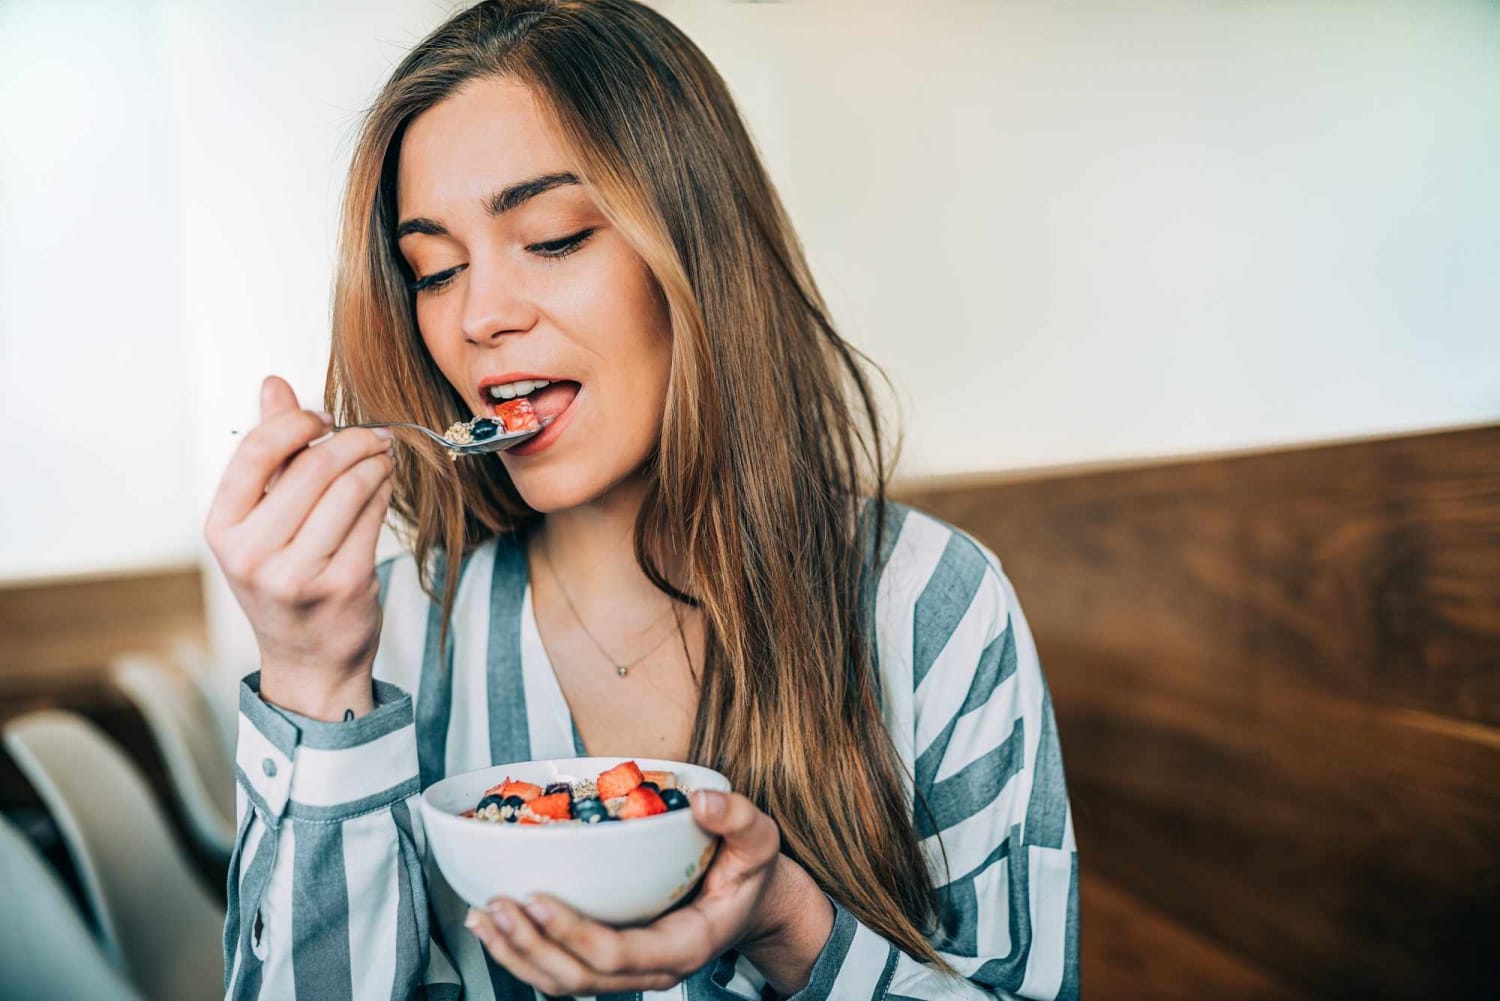 10 Foods To Eat if You’re Trying To Lose Weight, According to Nutritionists